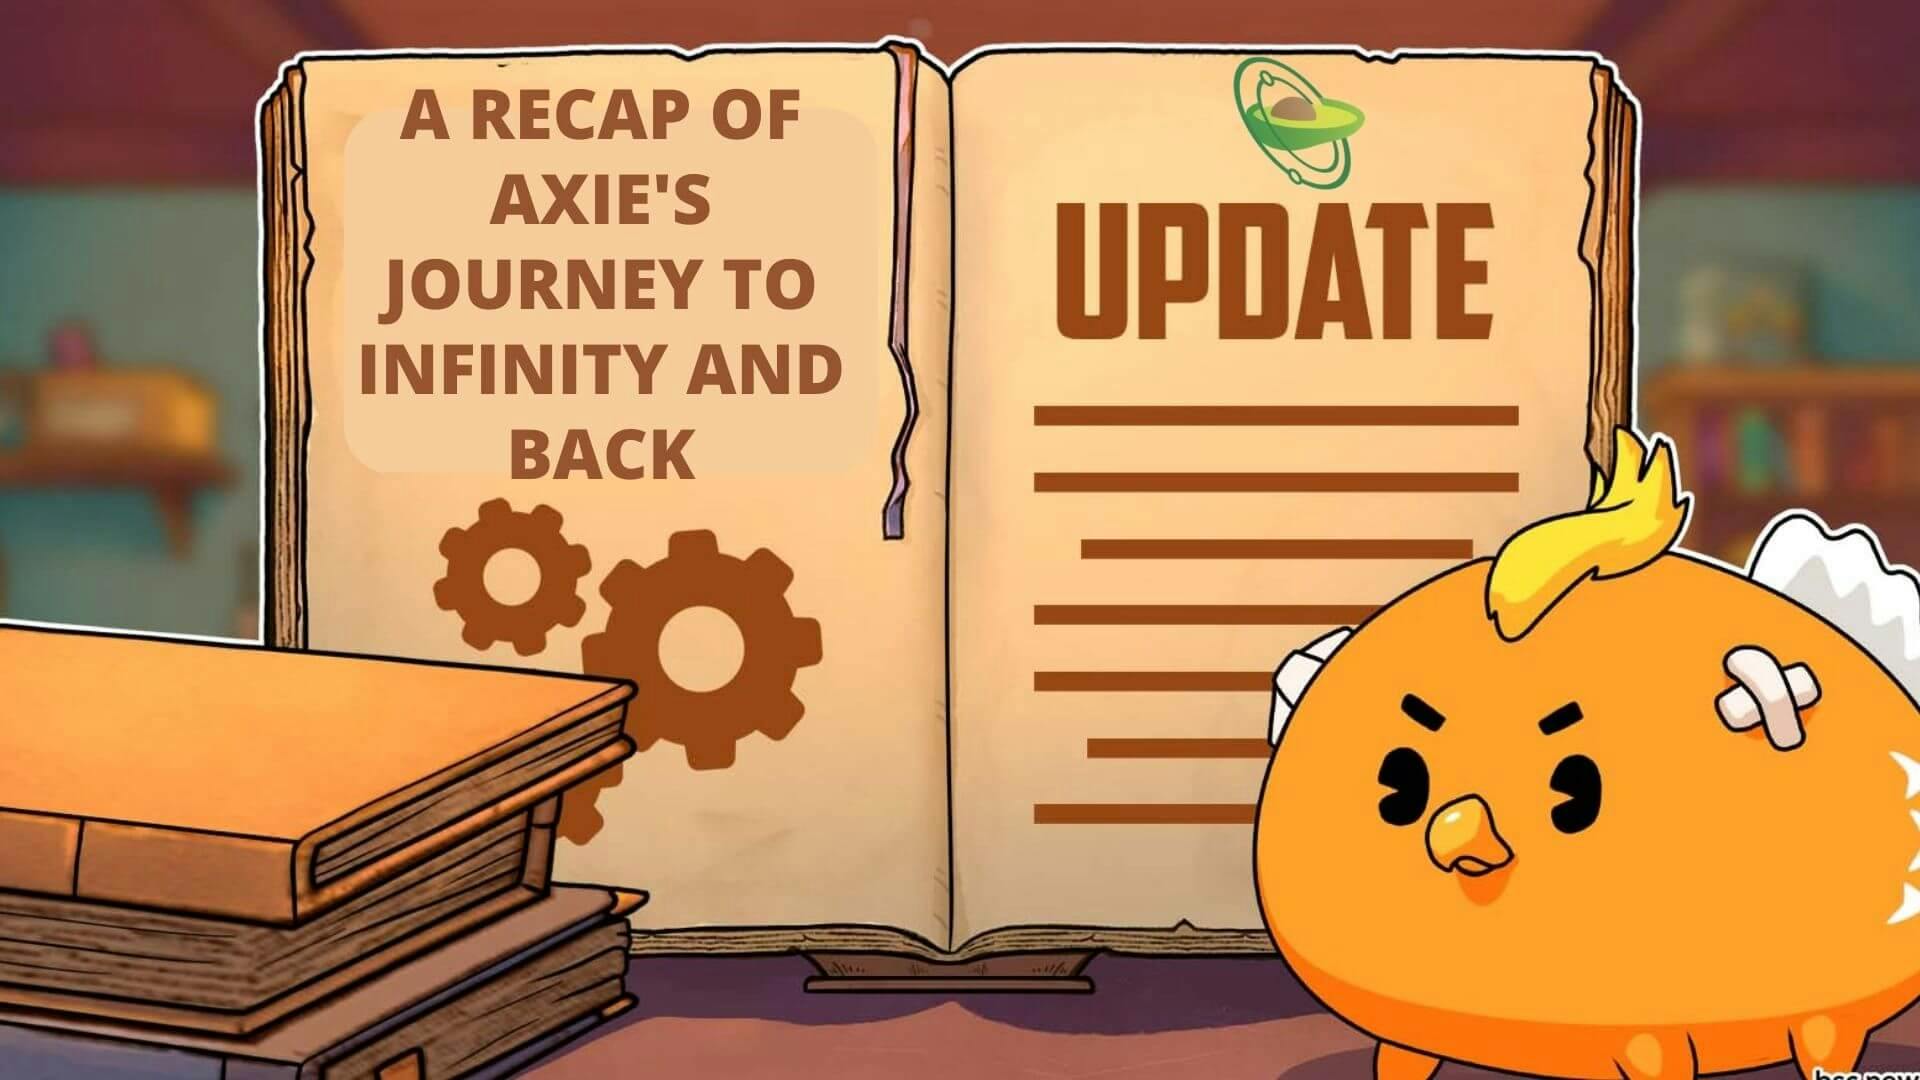 A recap of Axie’s journey to Infinity and back